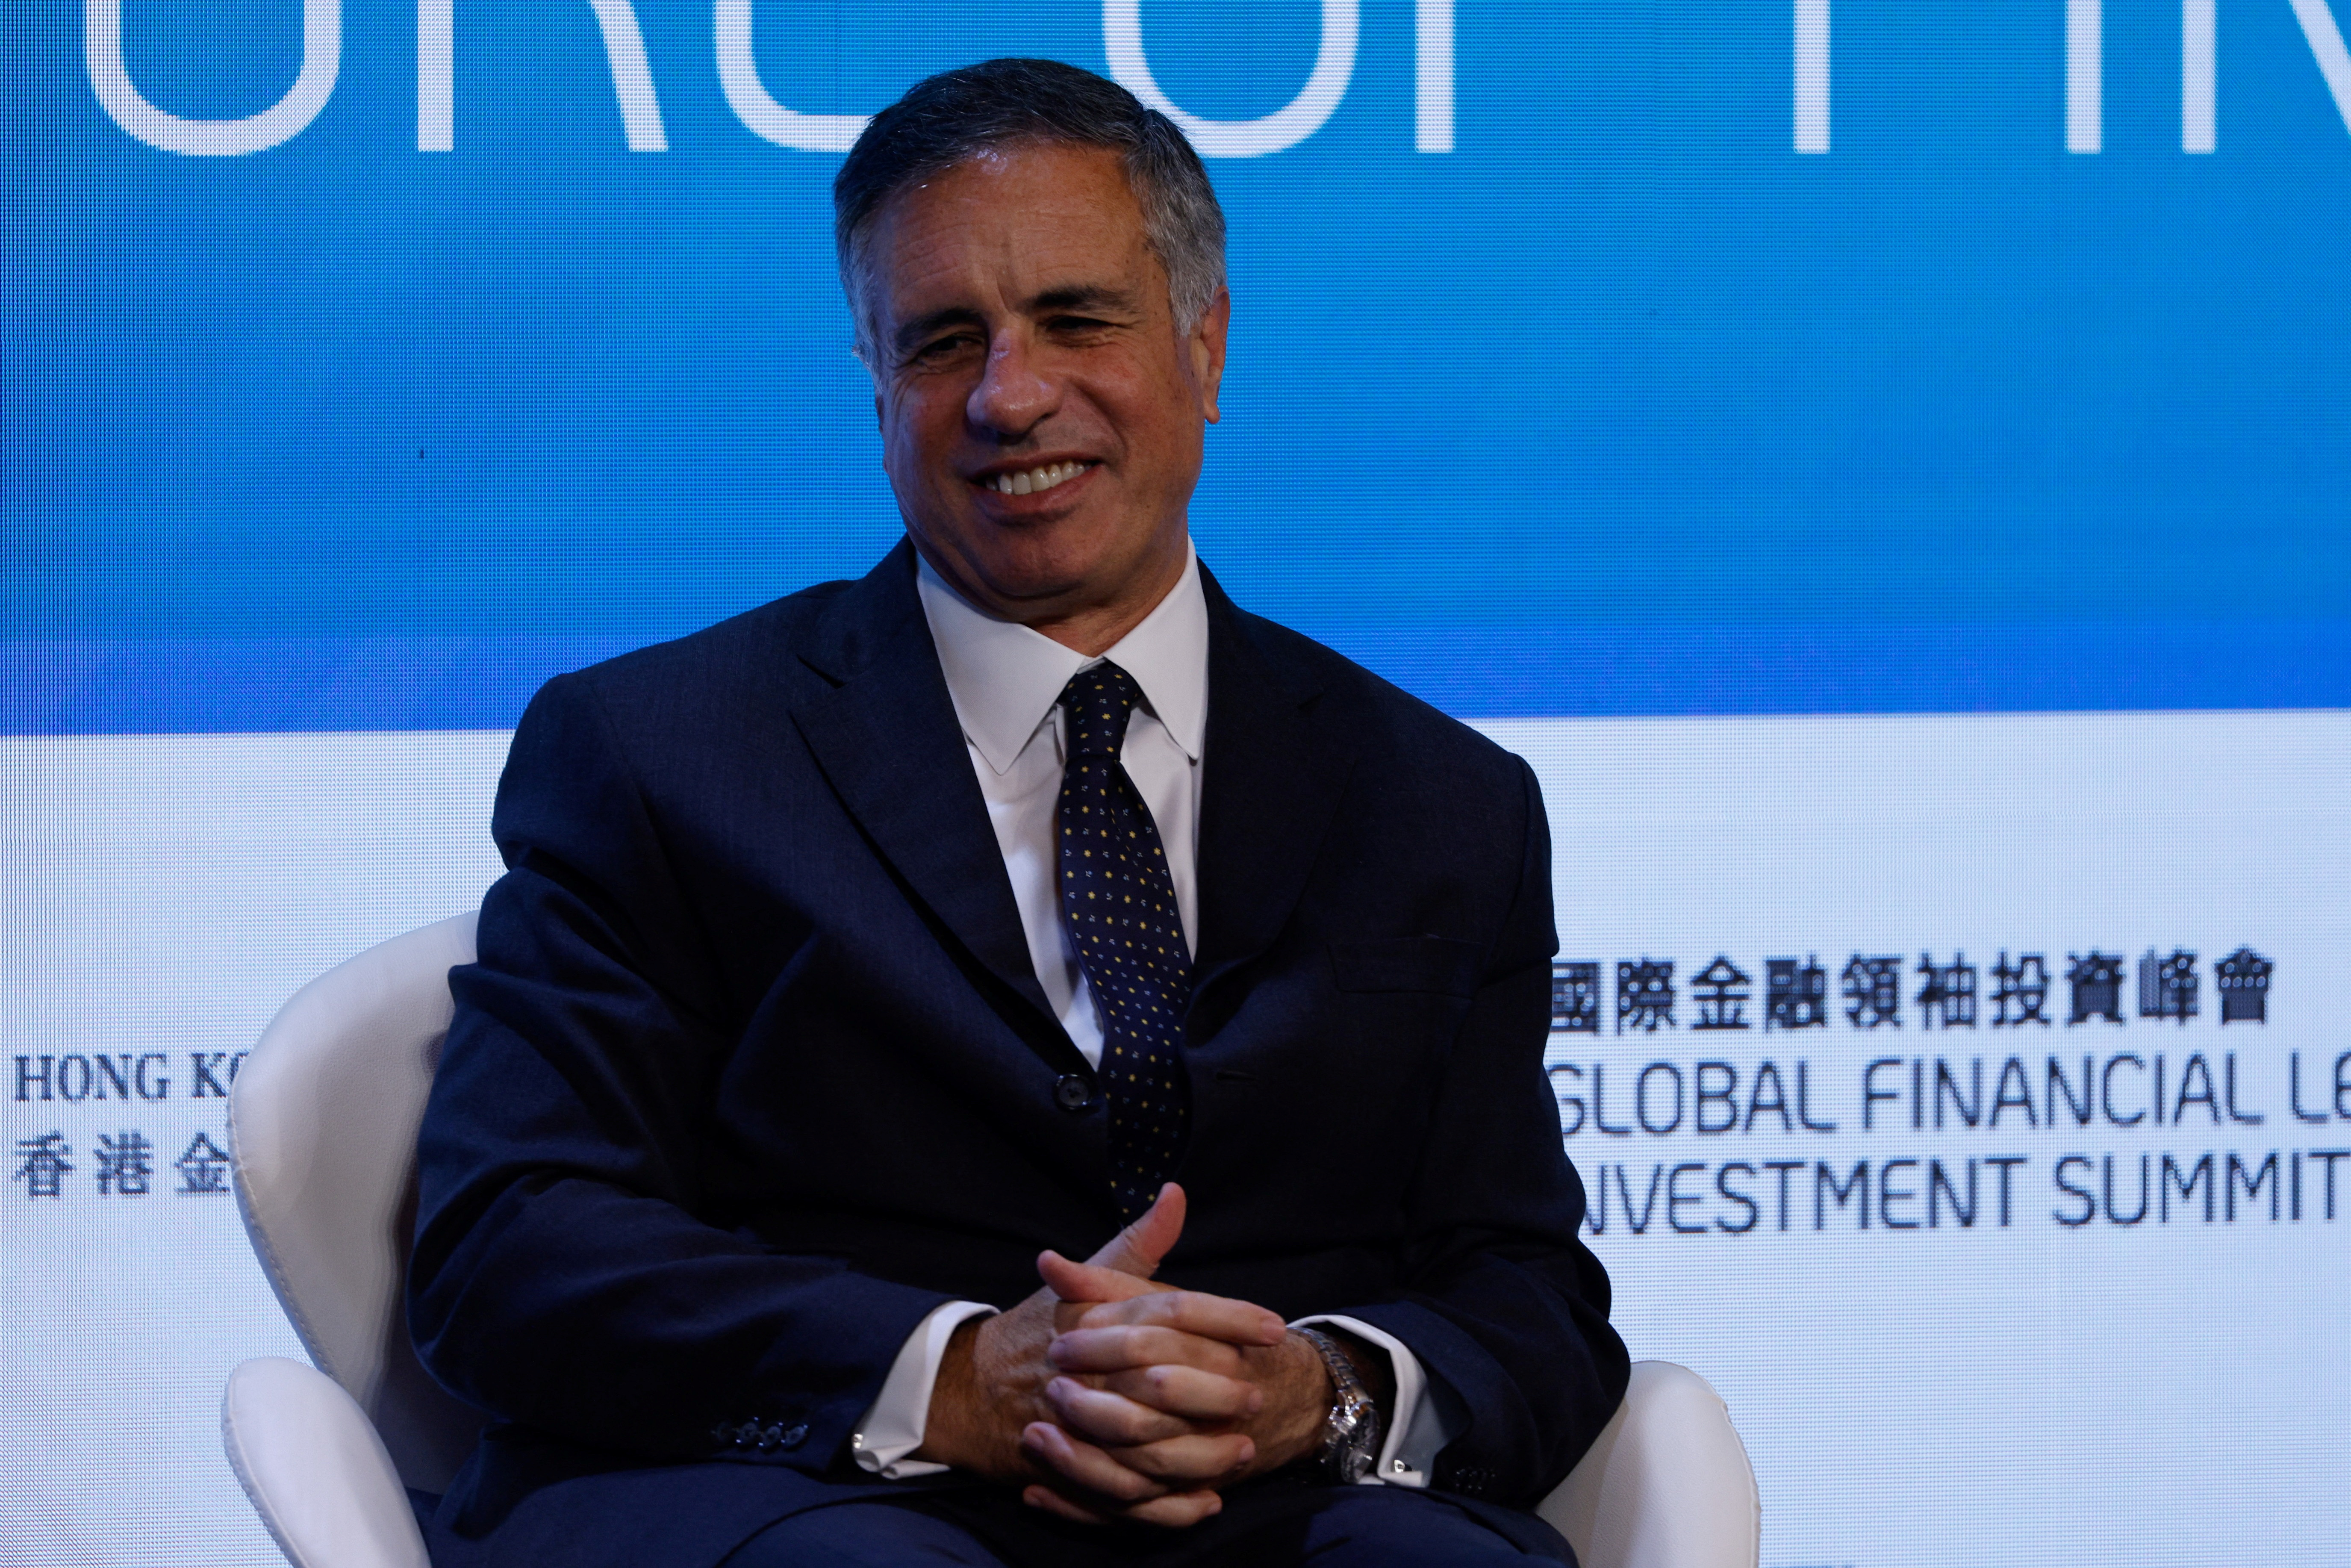 Daniel Pinto, President and chief operating officer of JPMorgan Chase & Co, attends the Global Financial Leaders' Investment Summit in Hong Kong